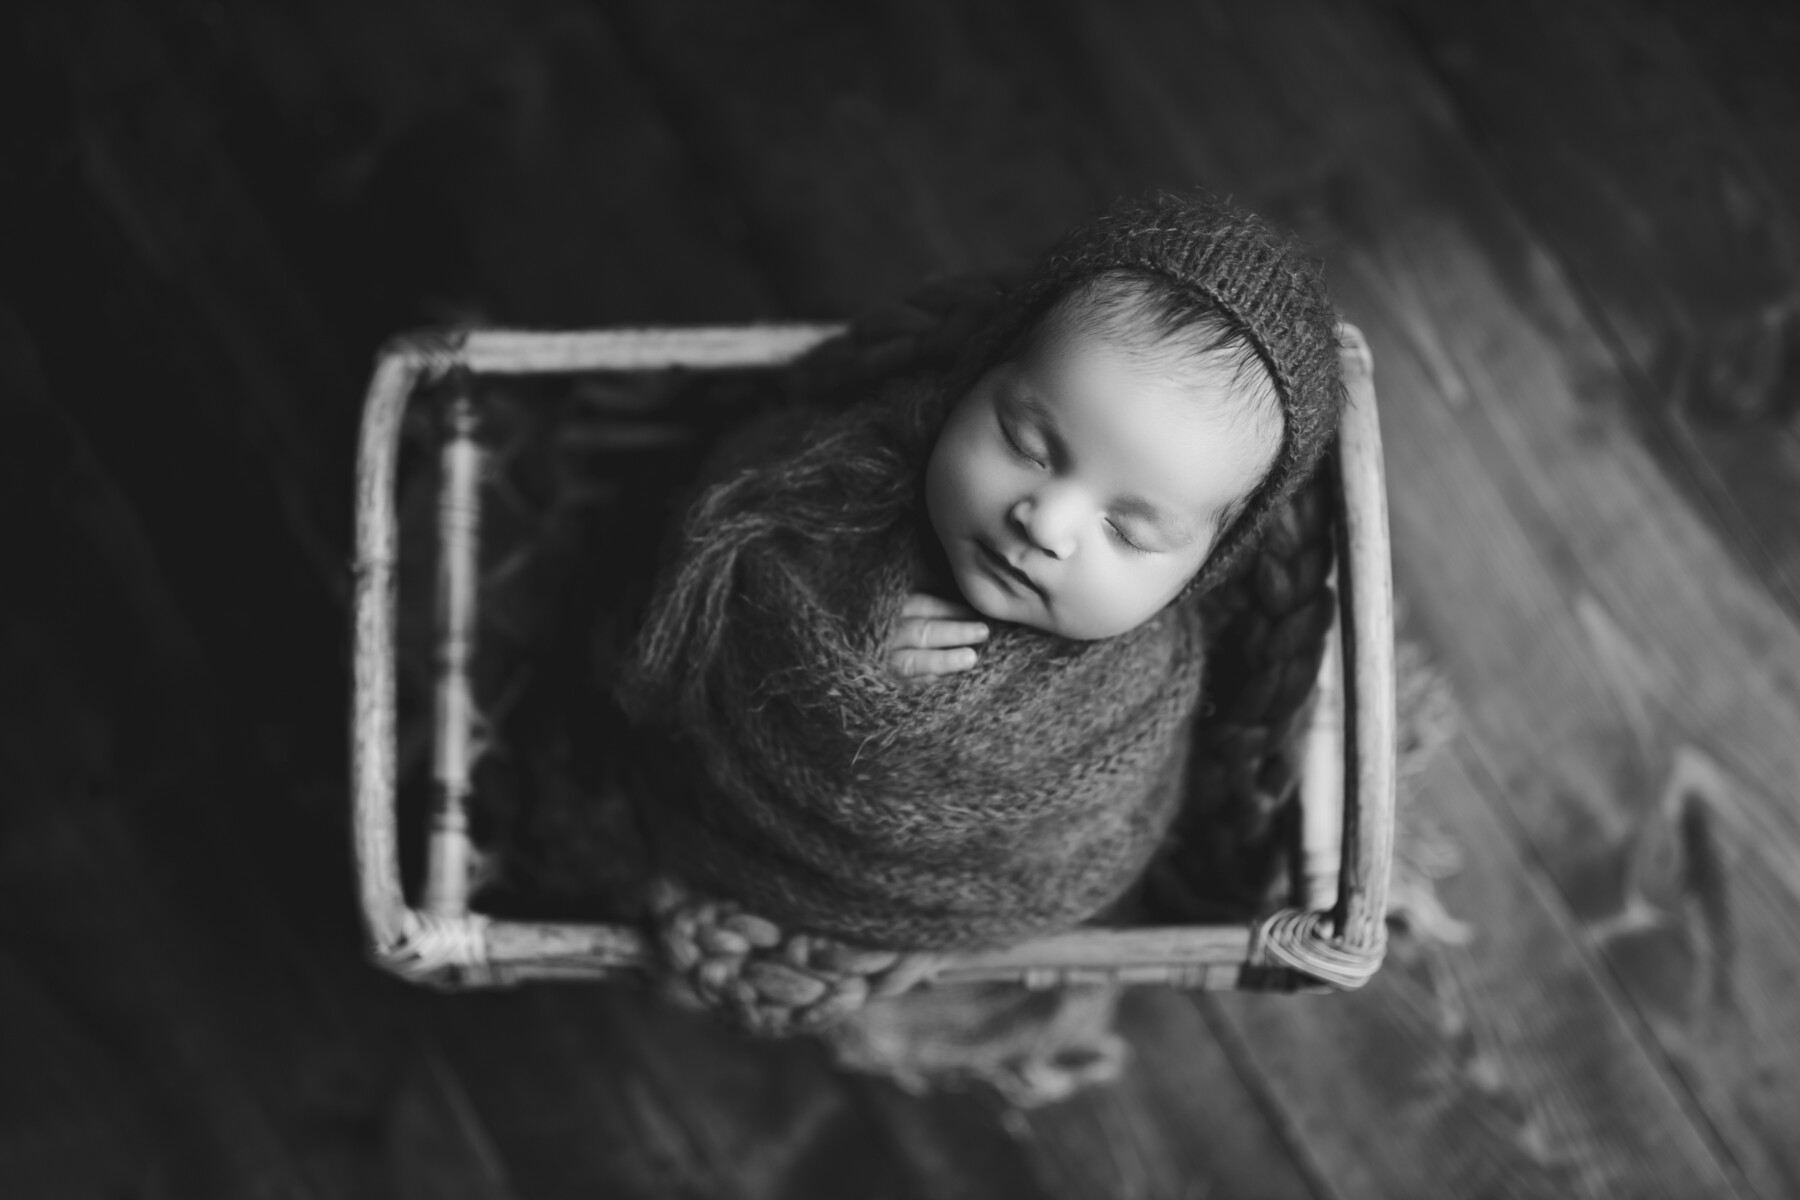 Timeless Newborn Session with Evie Lynn Photography